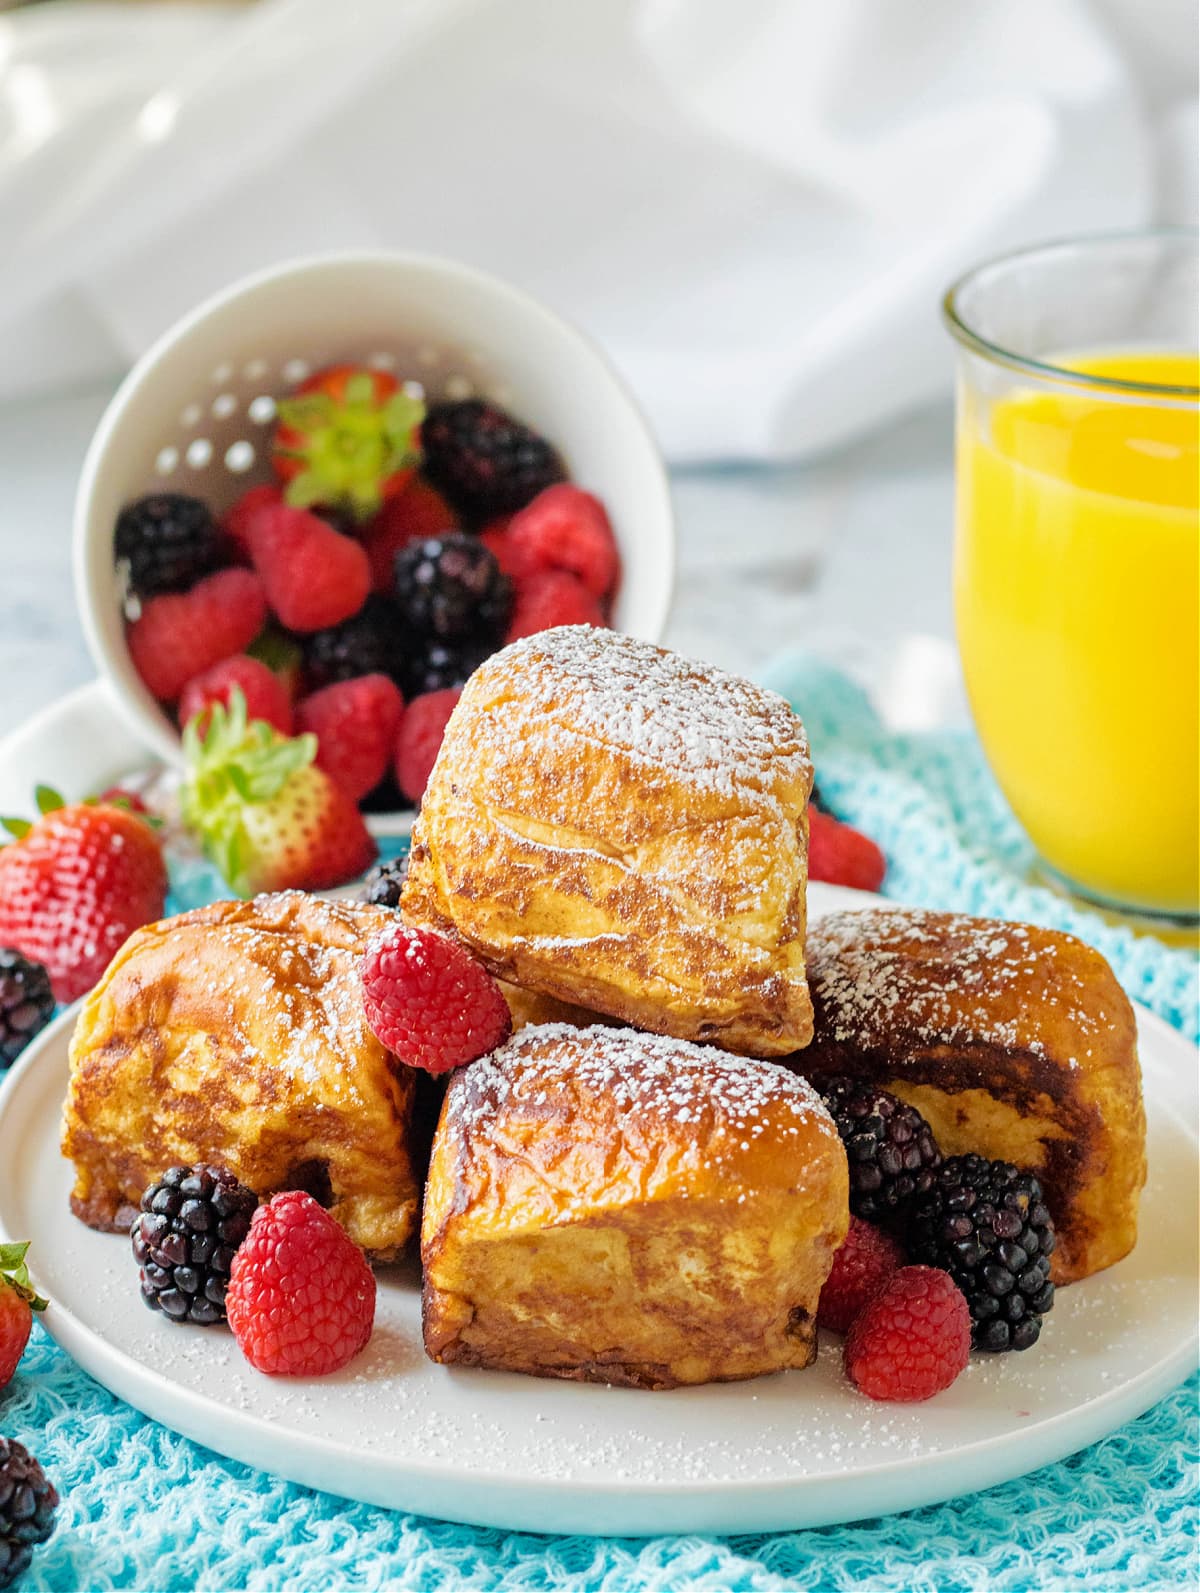 hawaiian roll french toast on white plate with fruit and powdered sugar